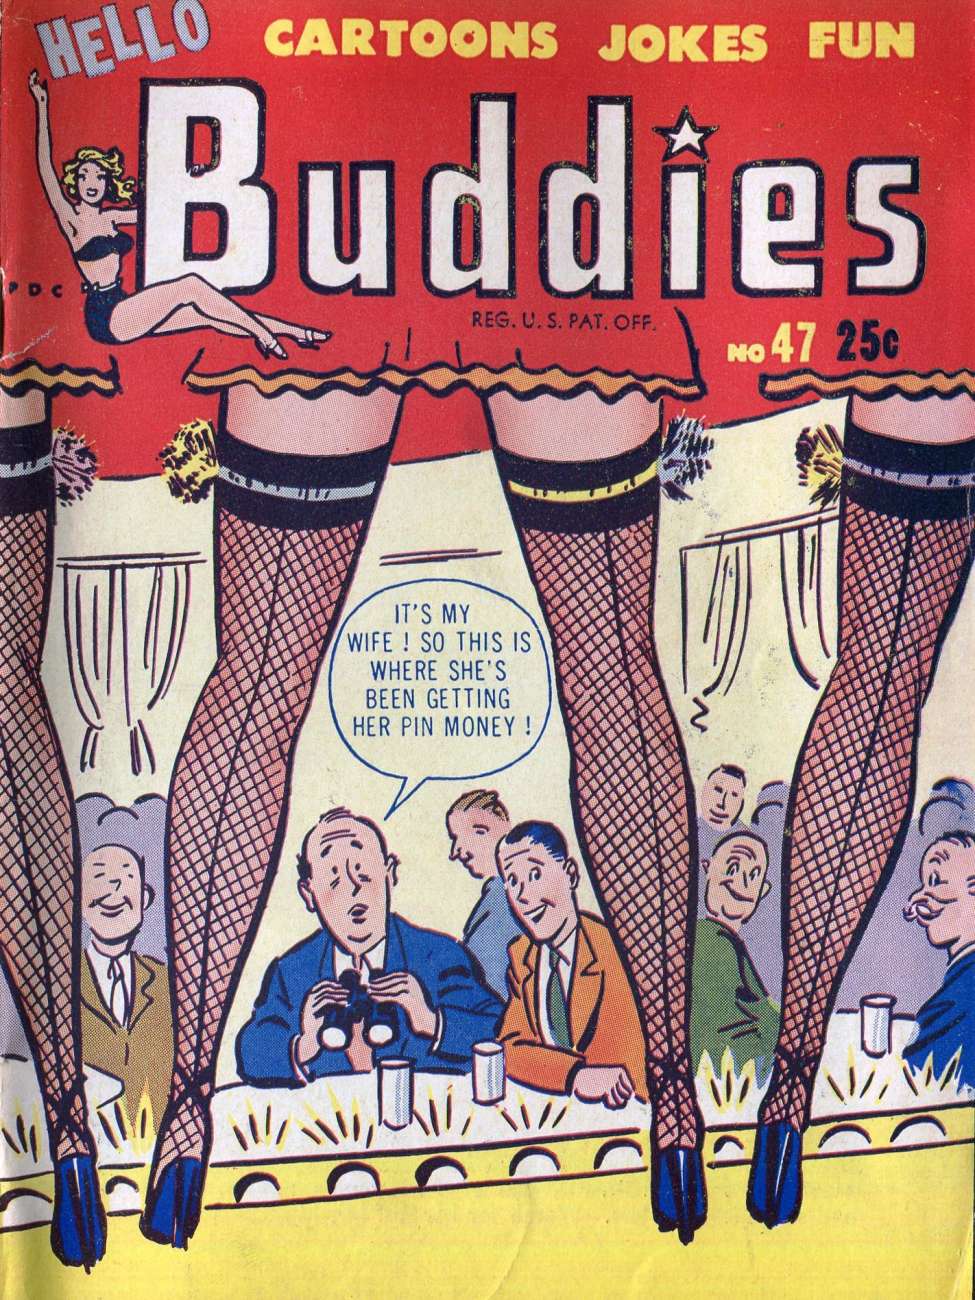 Book Cover For Hello Buddies 47